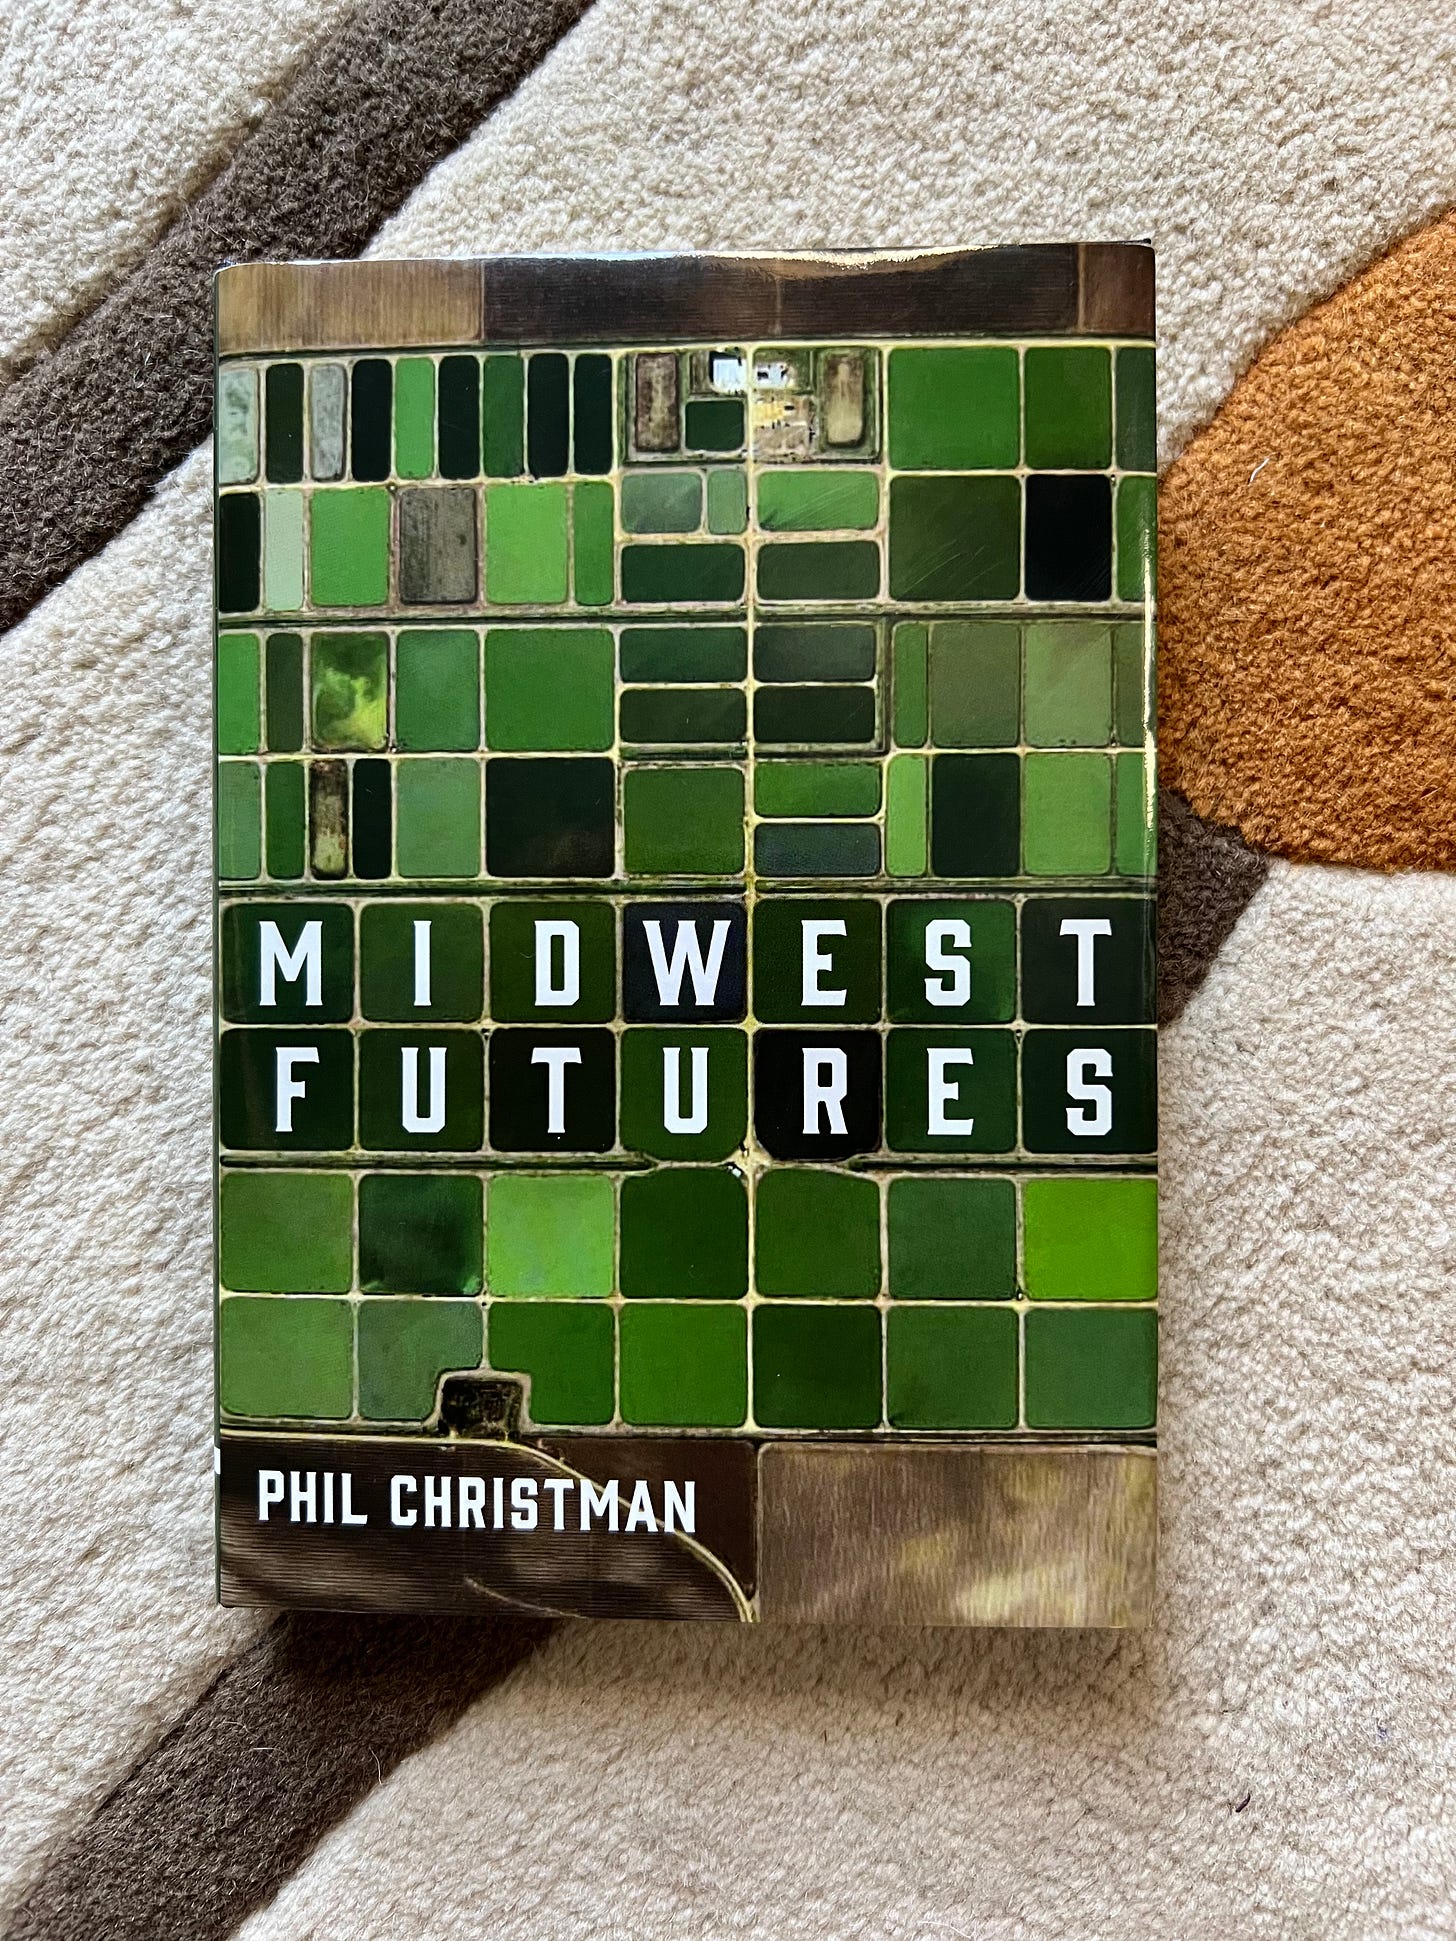 picture of the book Midwest Futures against a background of white, brown, and orange